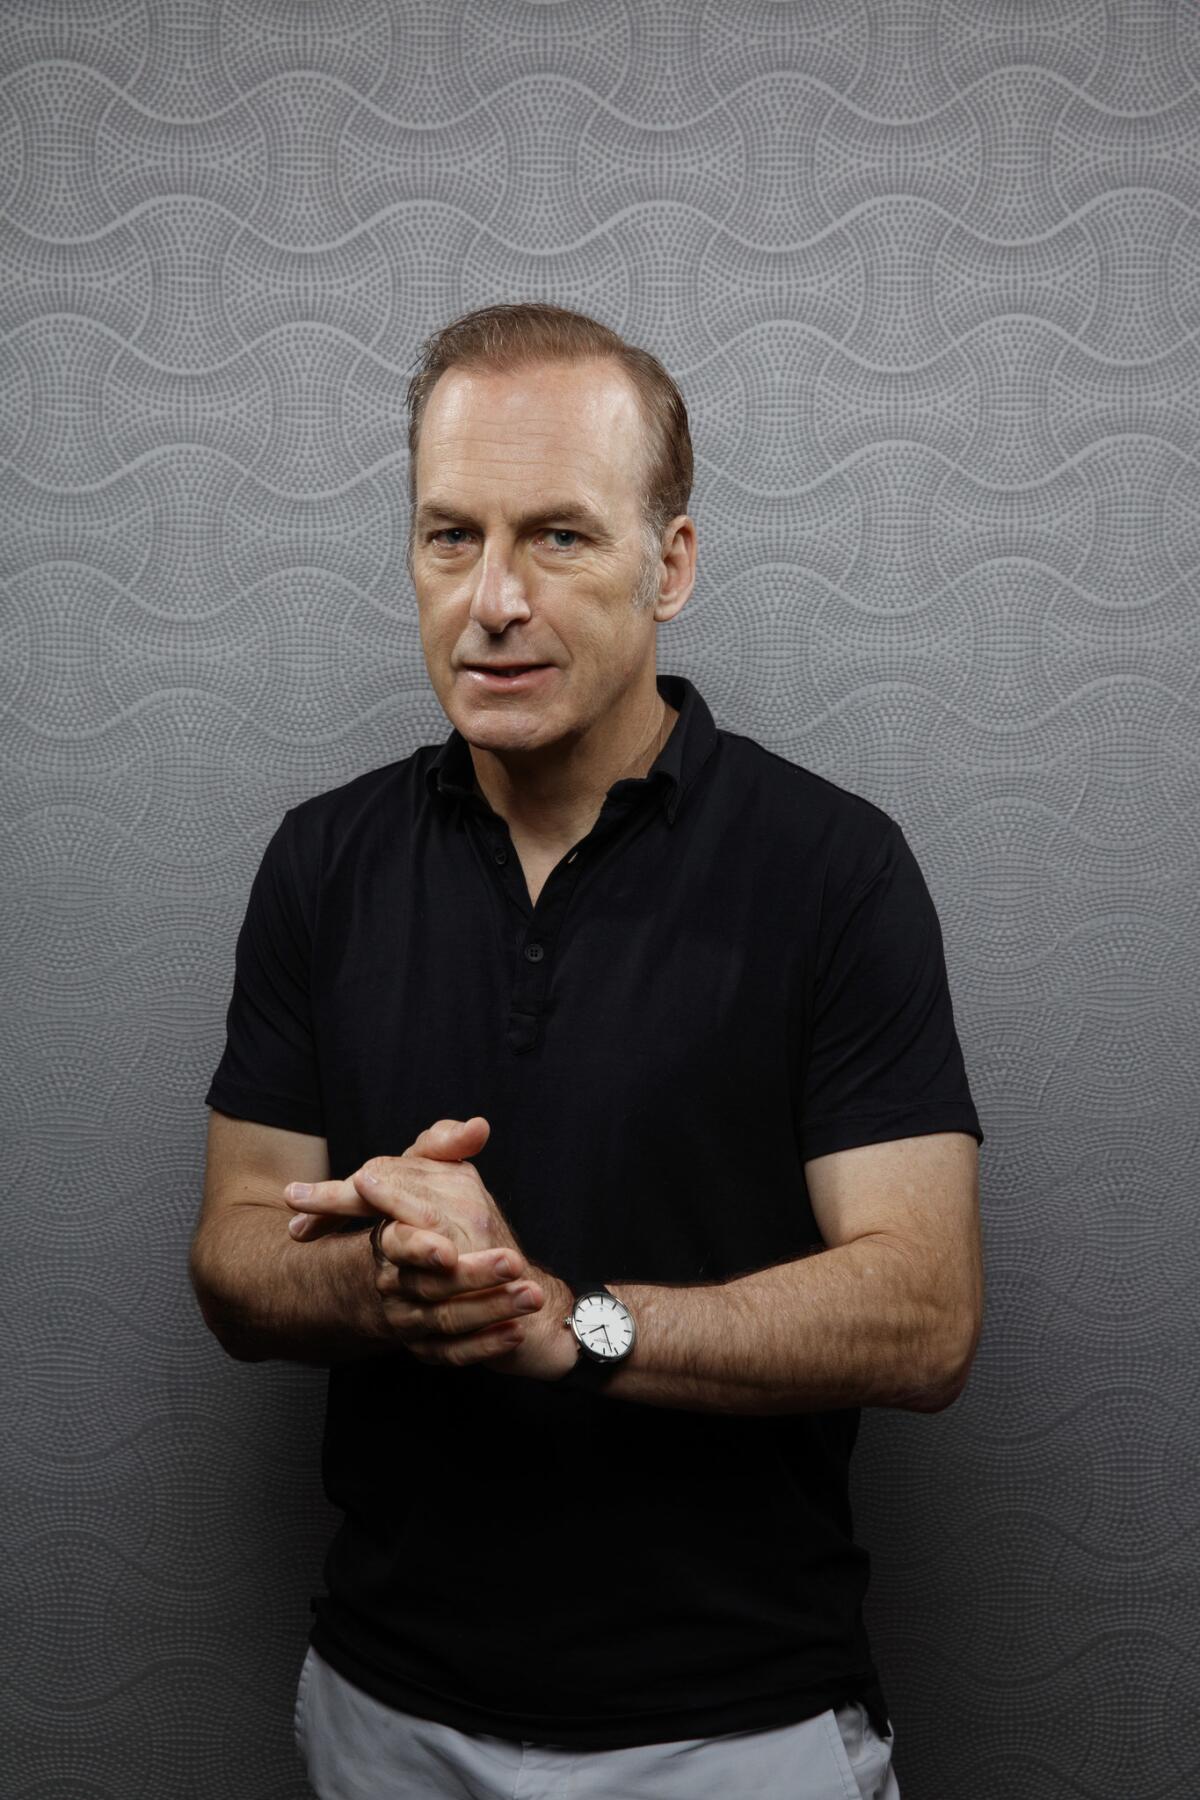 Bob Odenkirk from the television series "Better Call Saul."